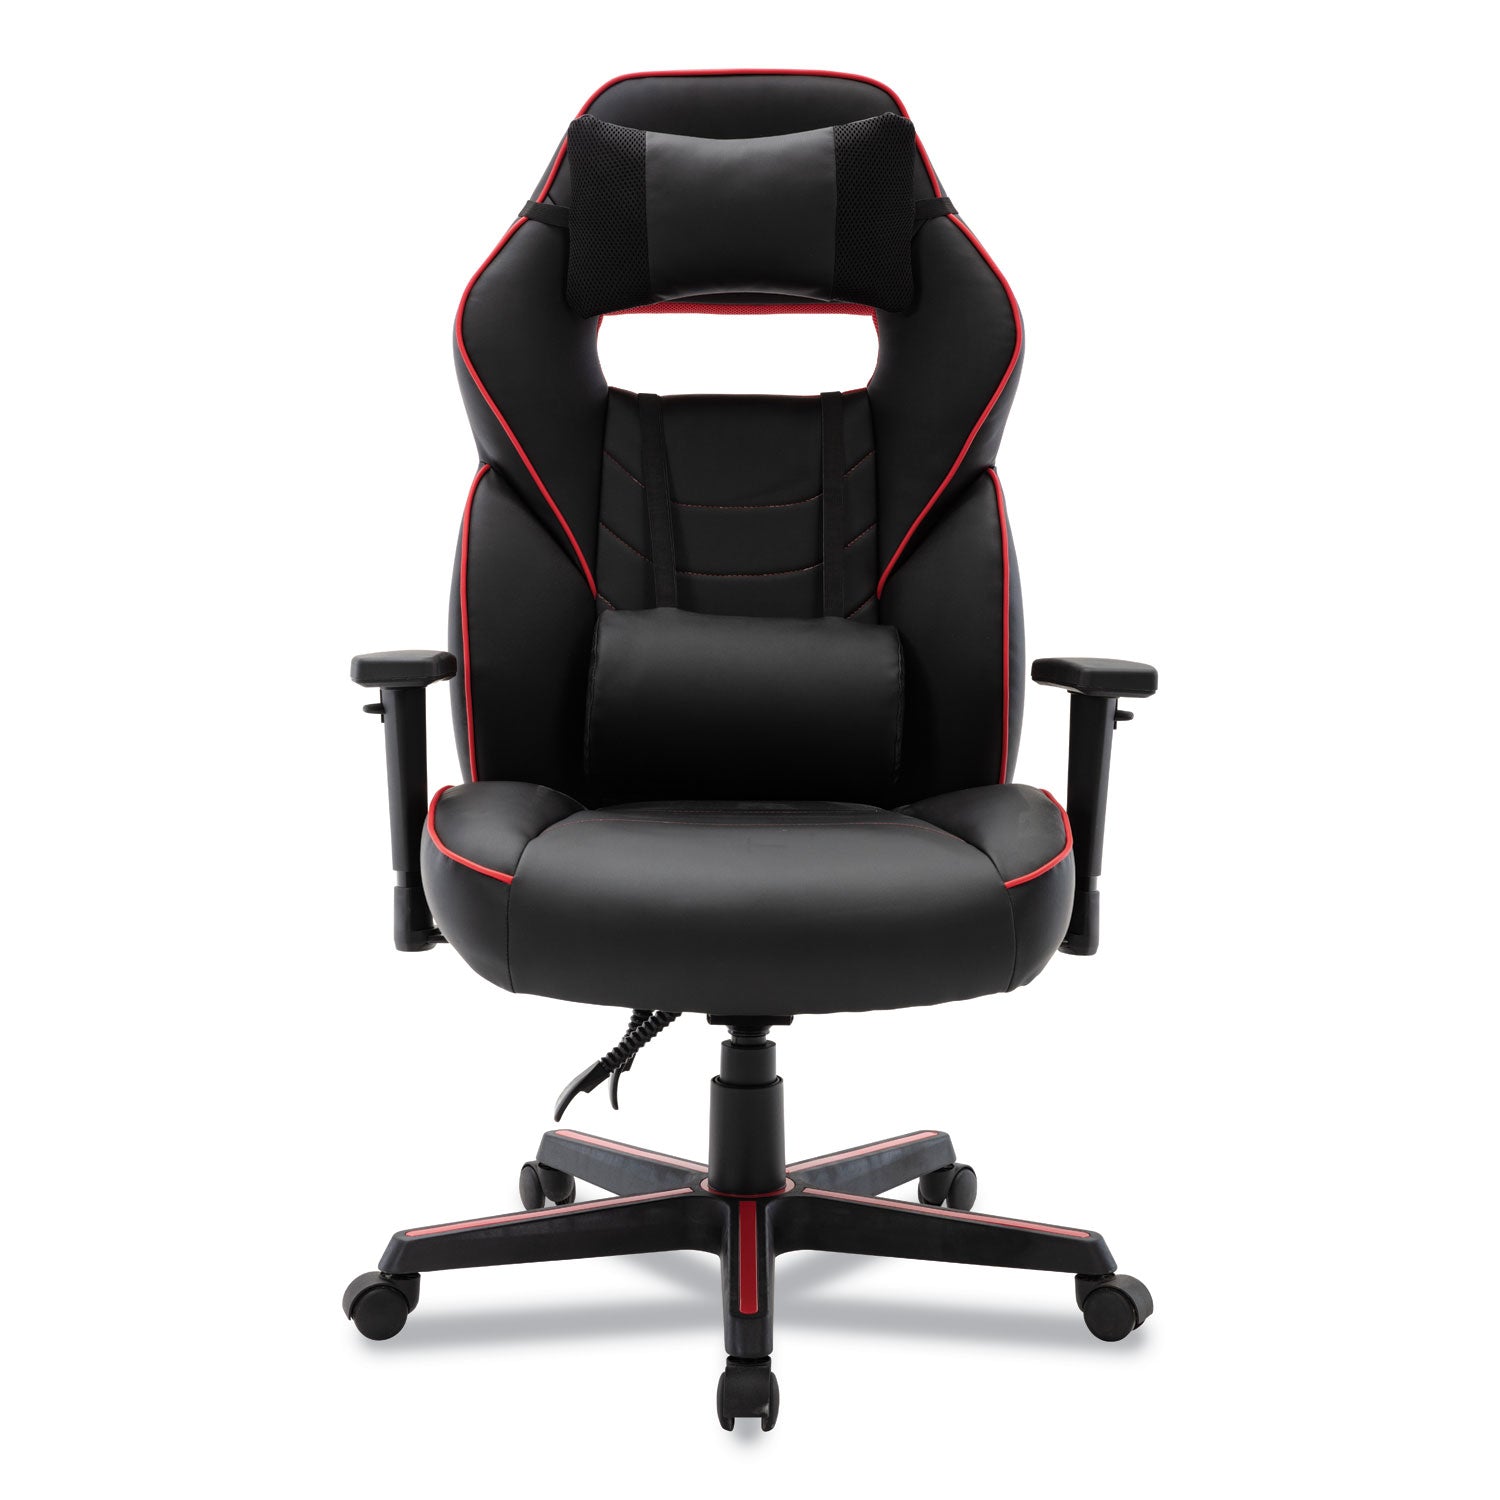 racing-style-ergonomic-gaming-chair-supports-275-lb-1591-to-198-seat-height-black-red-trim-seat-back-black-red-base_alegm4136 - 4